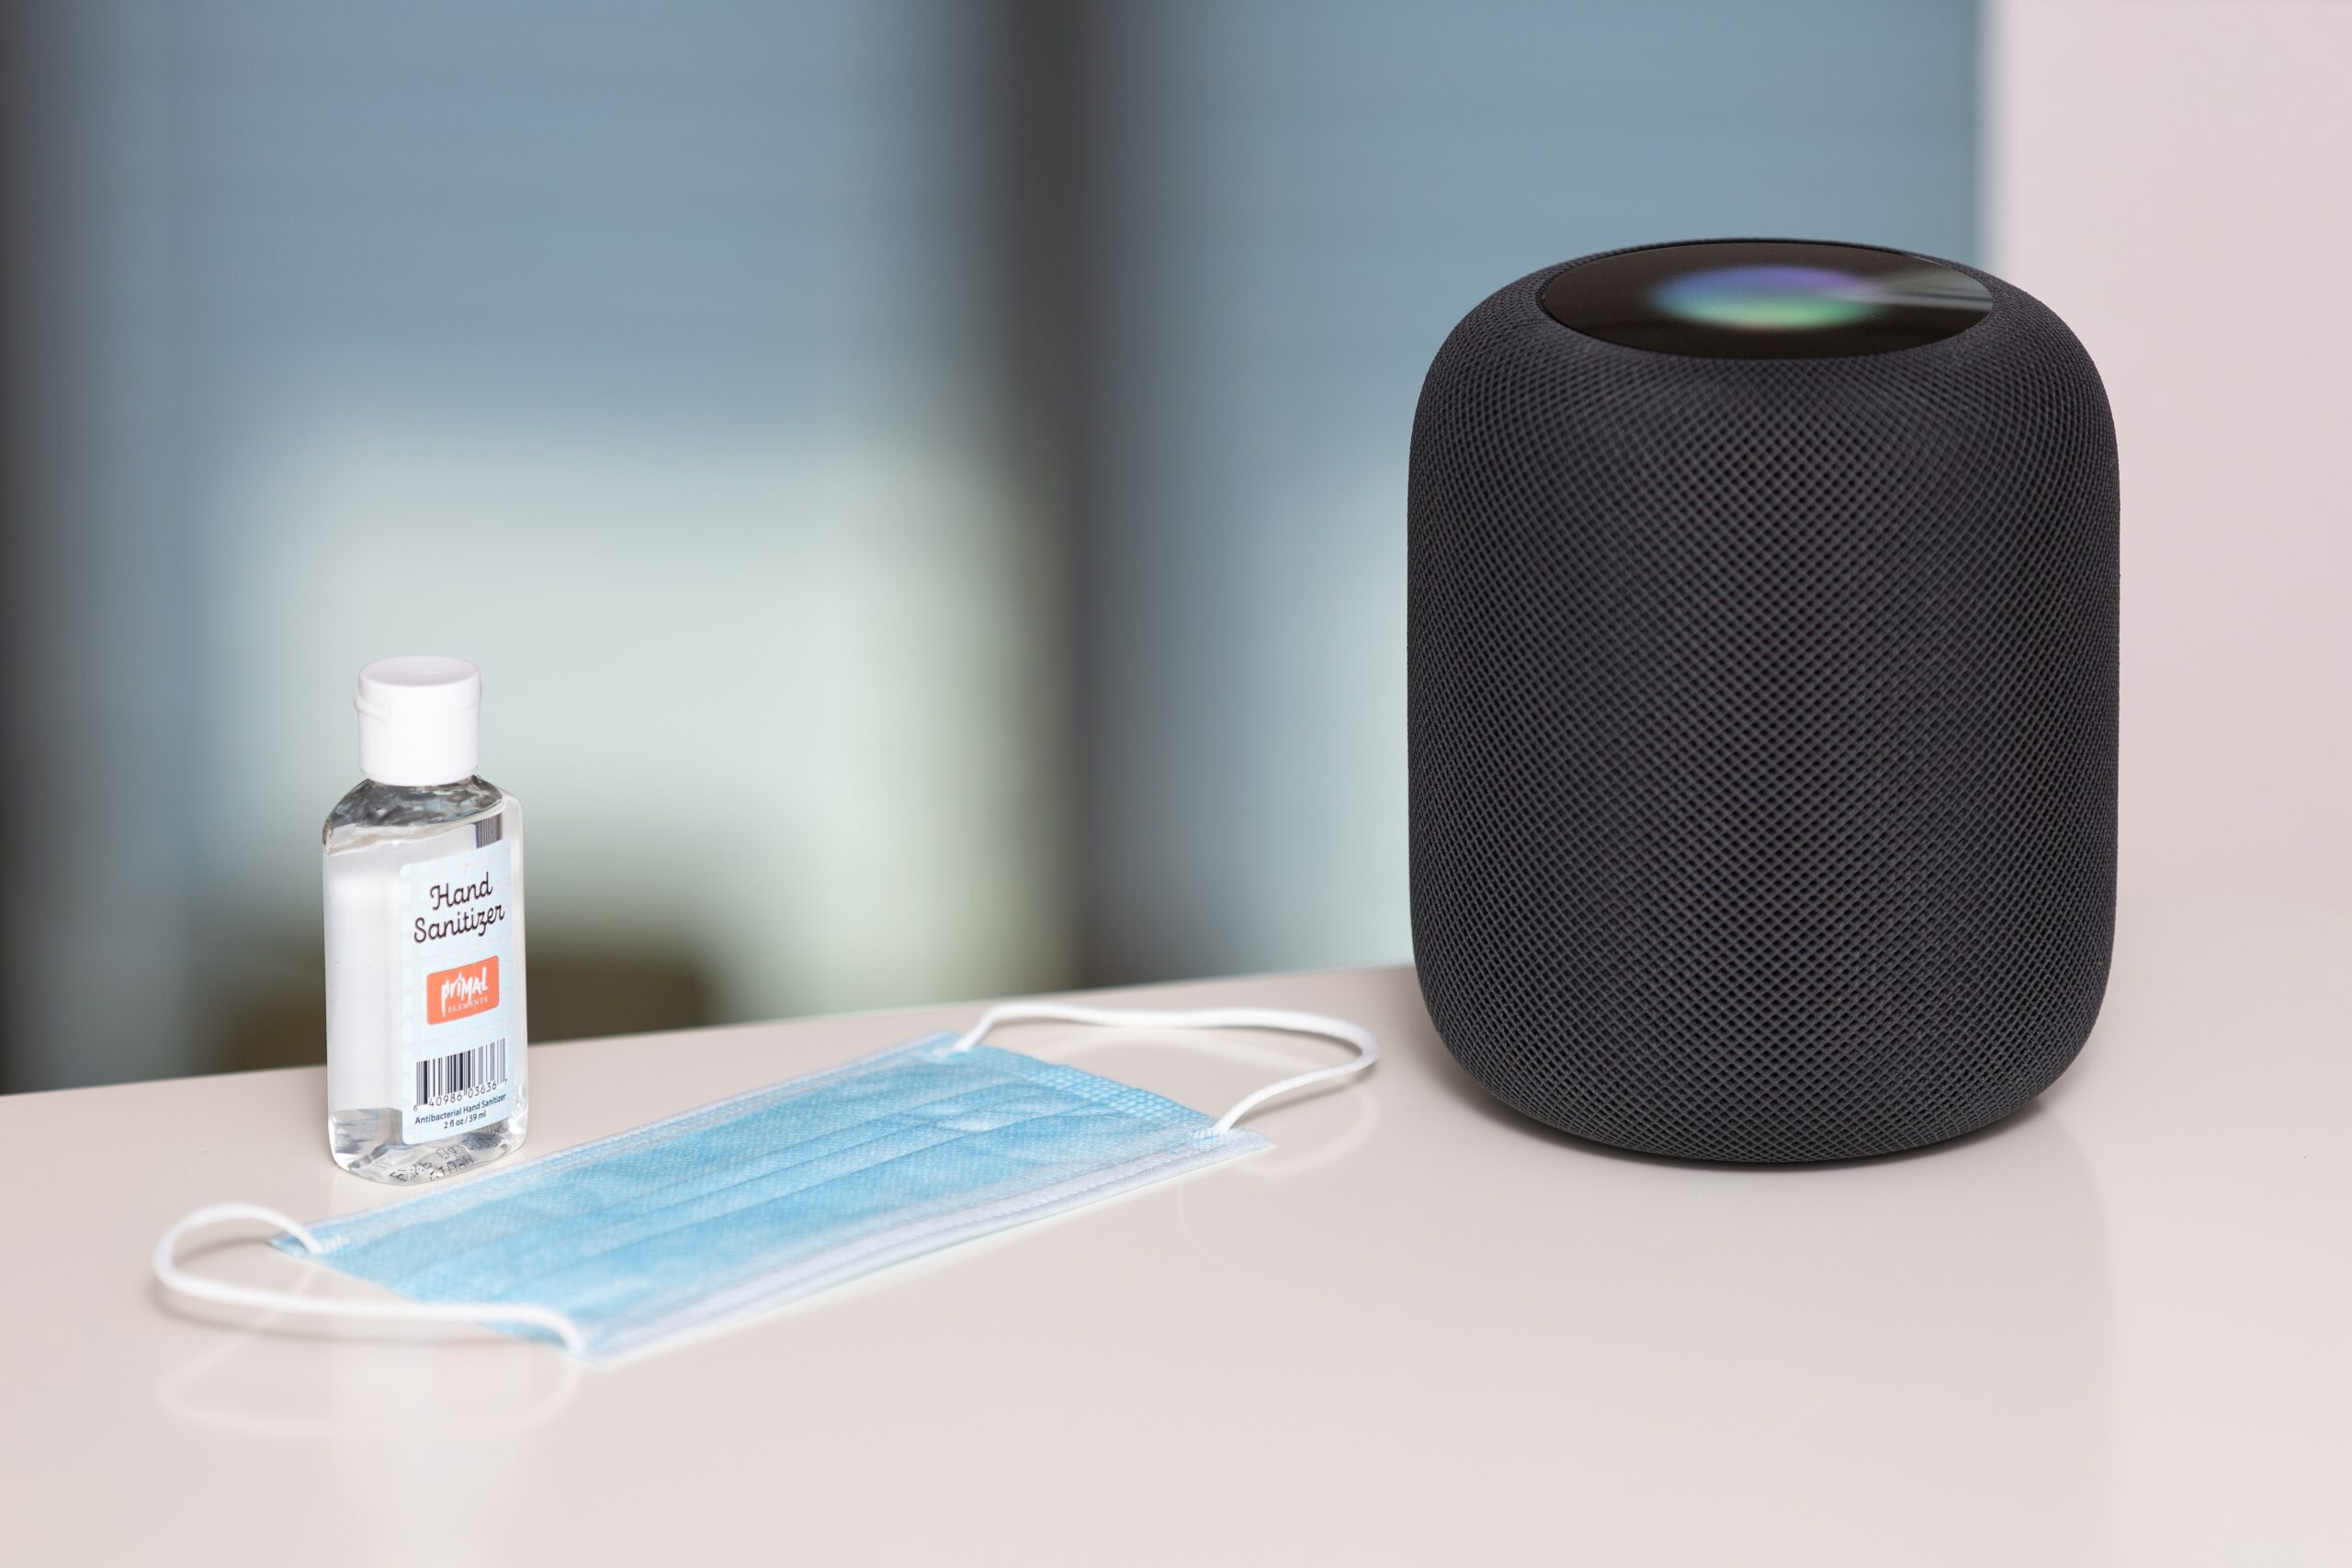 How to Disable Personal Requests on HomePod